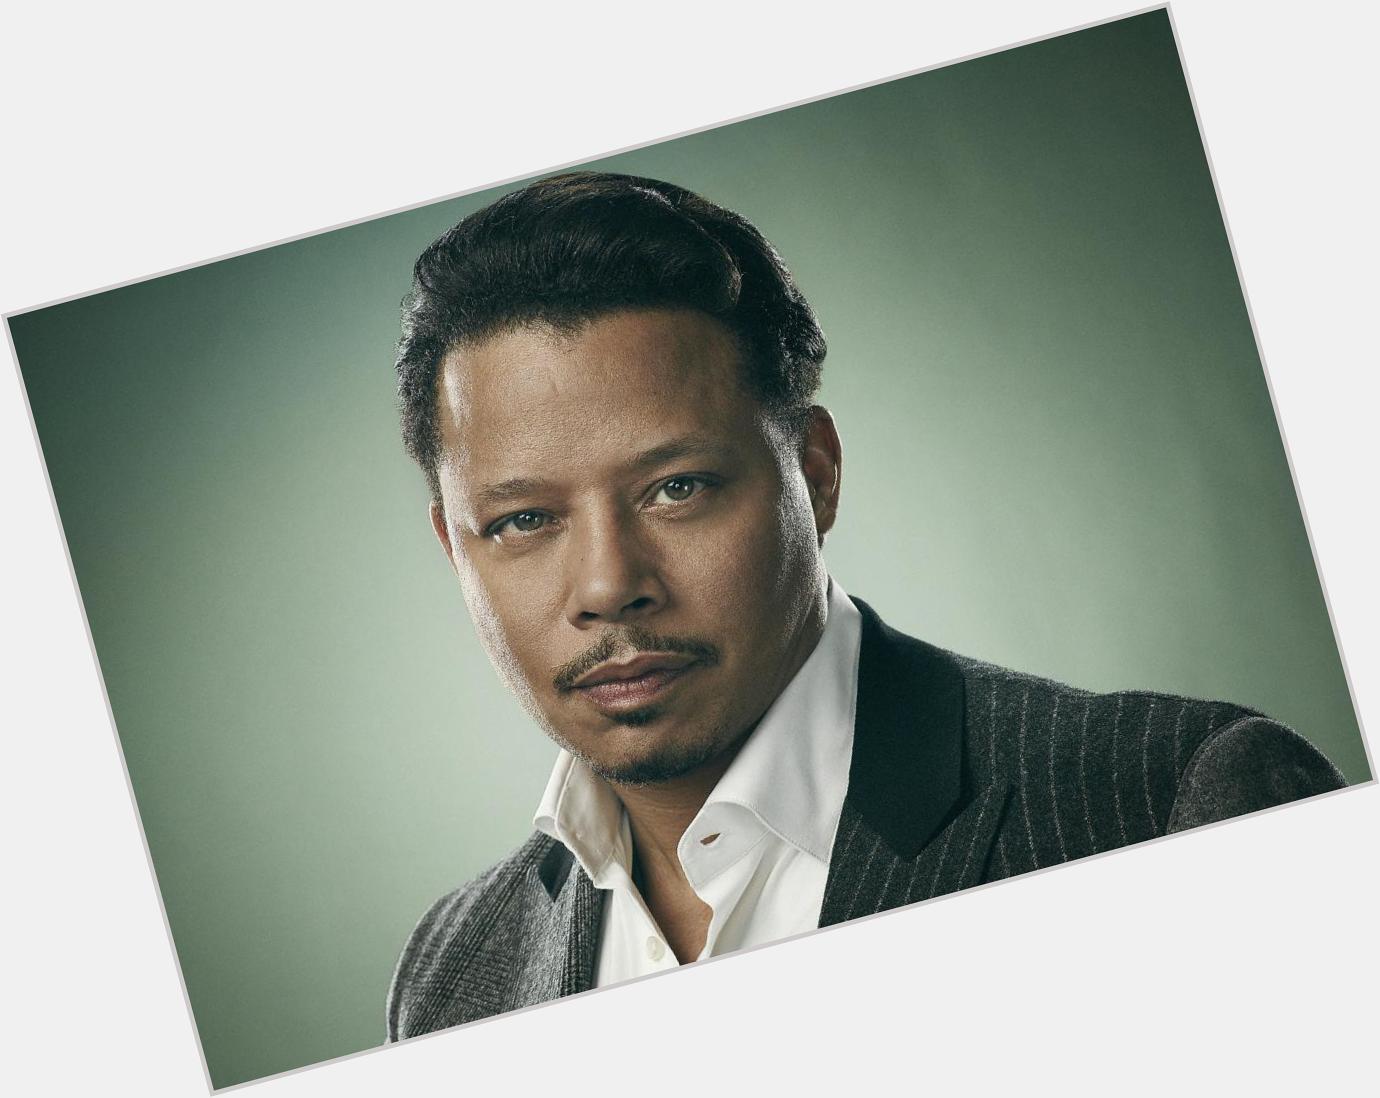 Happy Birthday to Terrence Howard, who turns 46 today! 